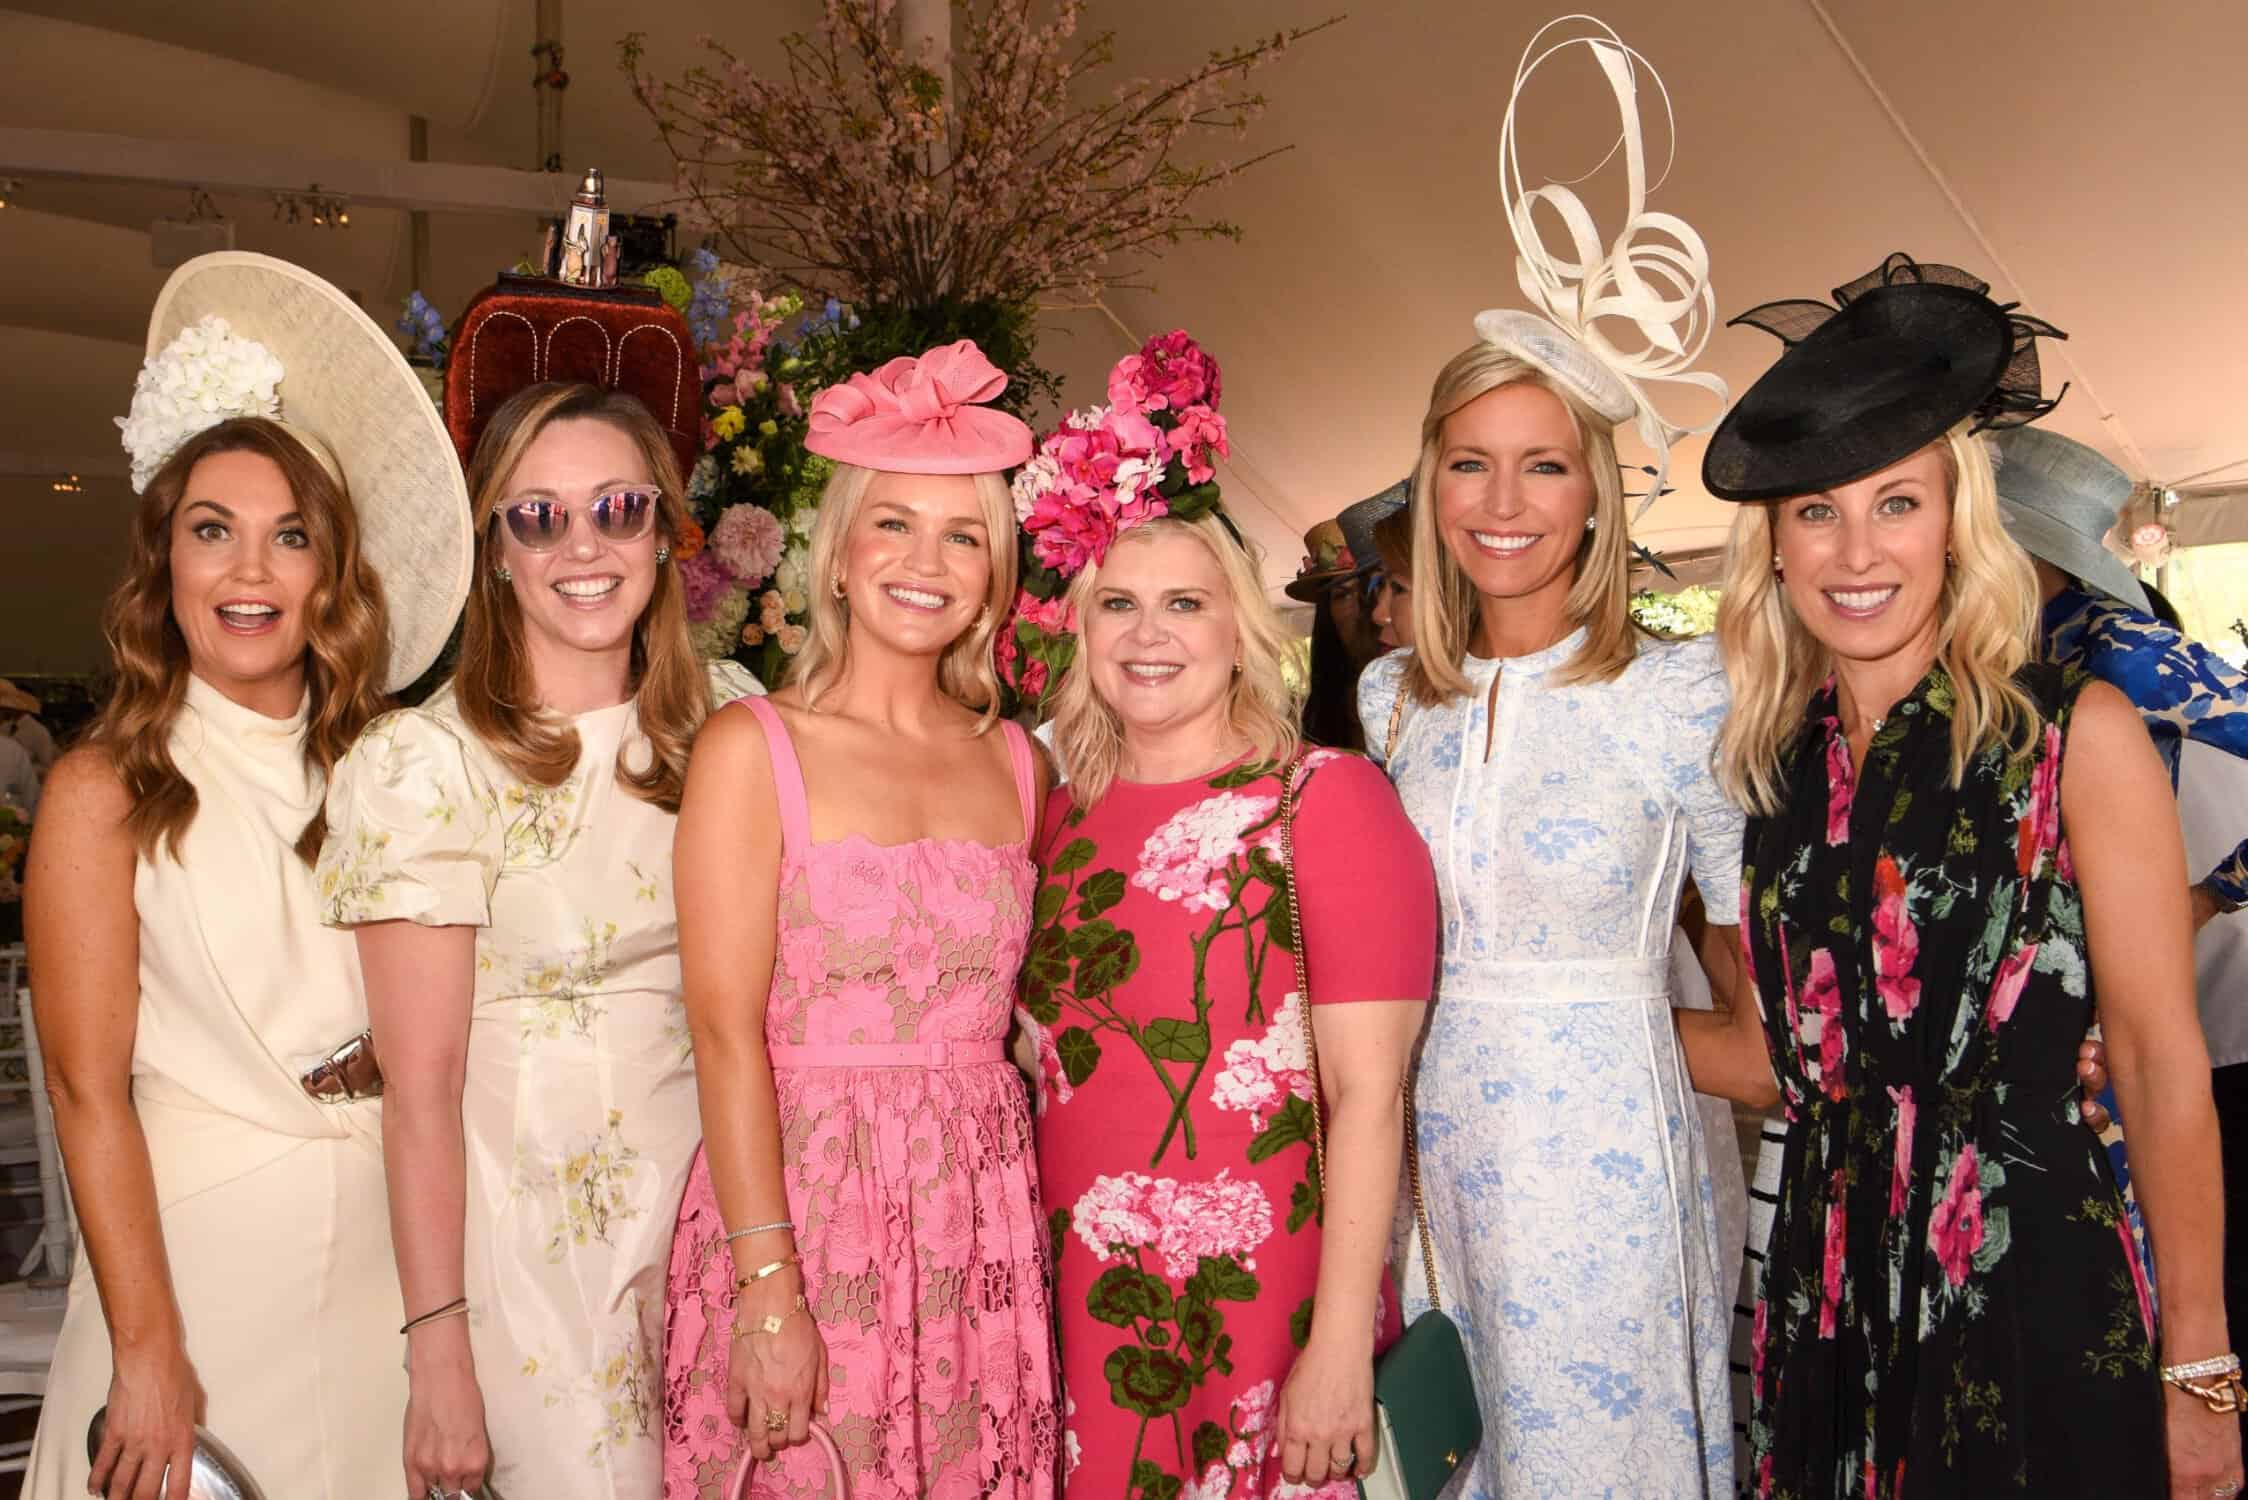 Central Park Conservancy, Women's Committee, luncheon, events, Dustee Jenkins, Erin Nance, Lizzy Quick, Whitney Mogavero, Ainsley Earhardt, Stefanie Alfond